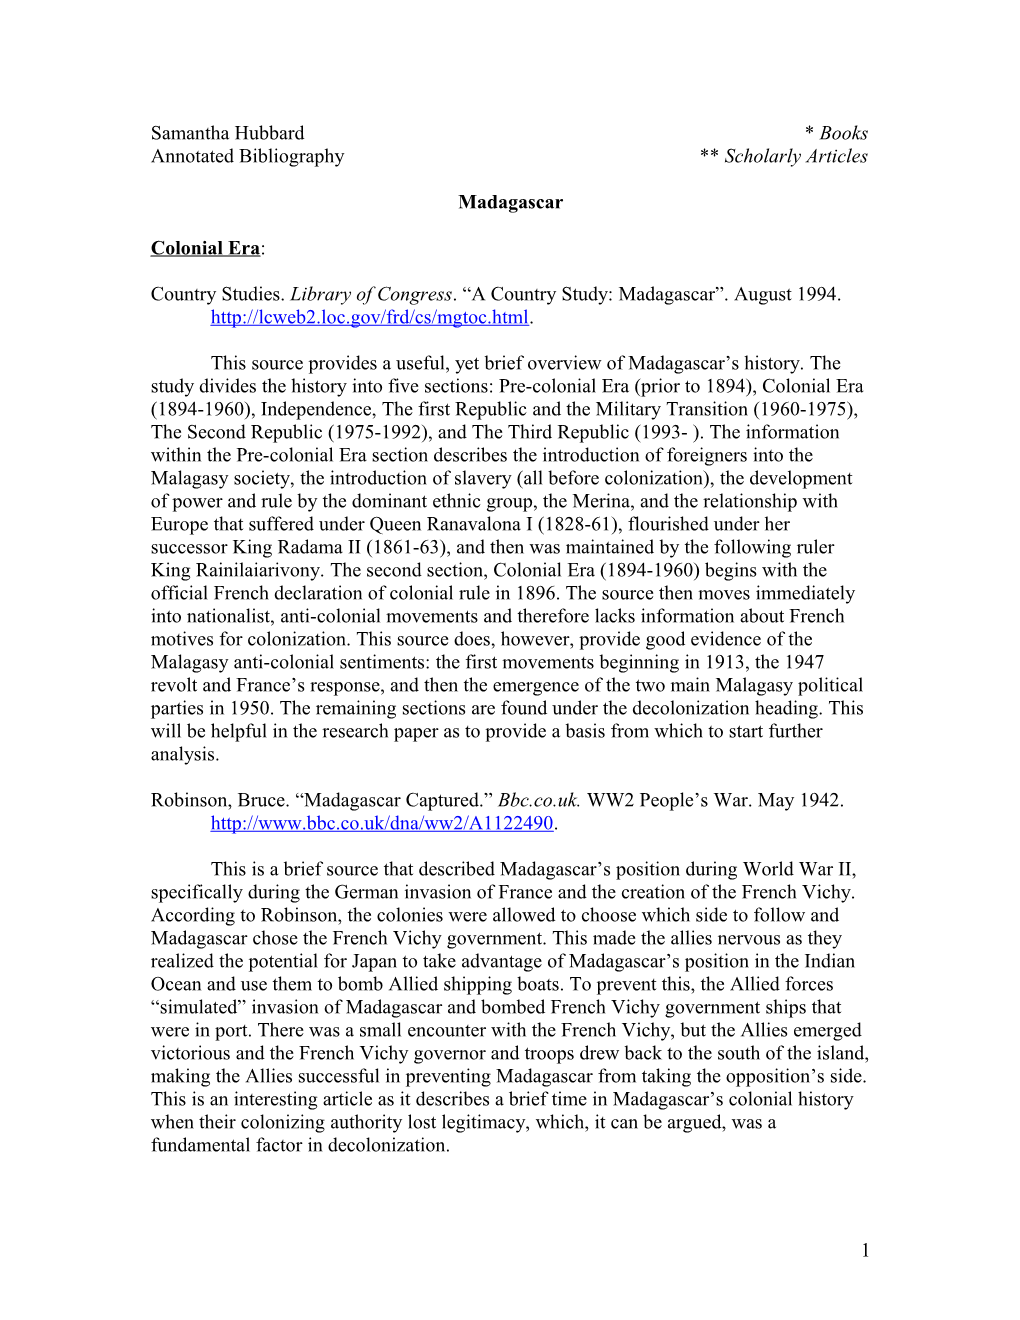 Annotated Bibliography Scholarly Articles